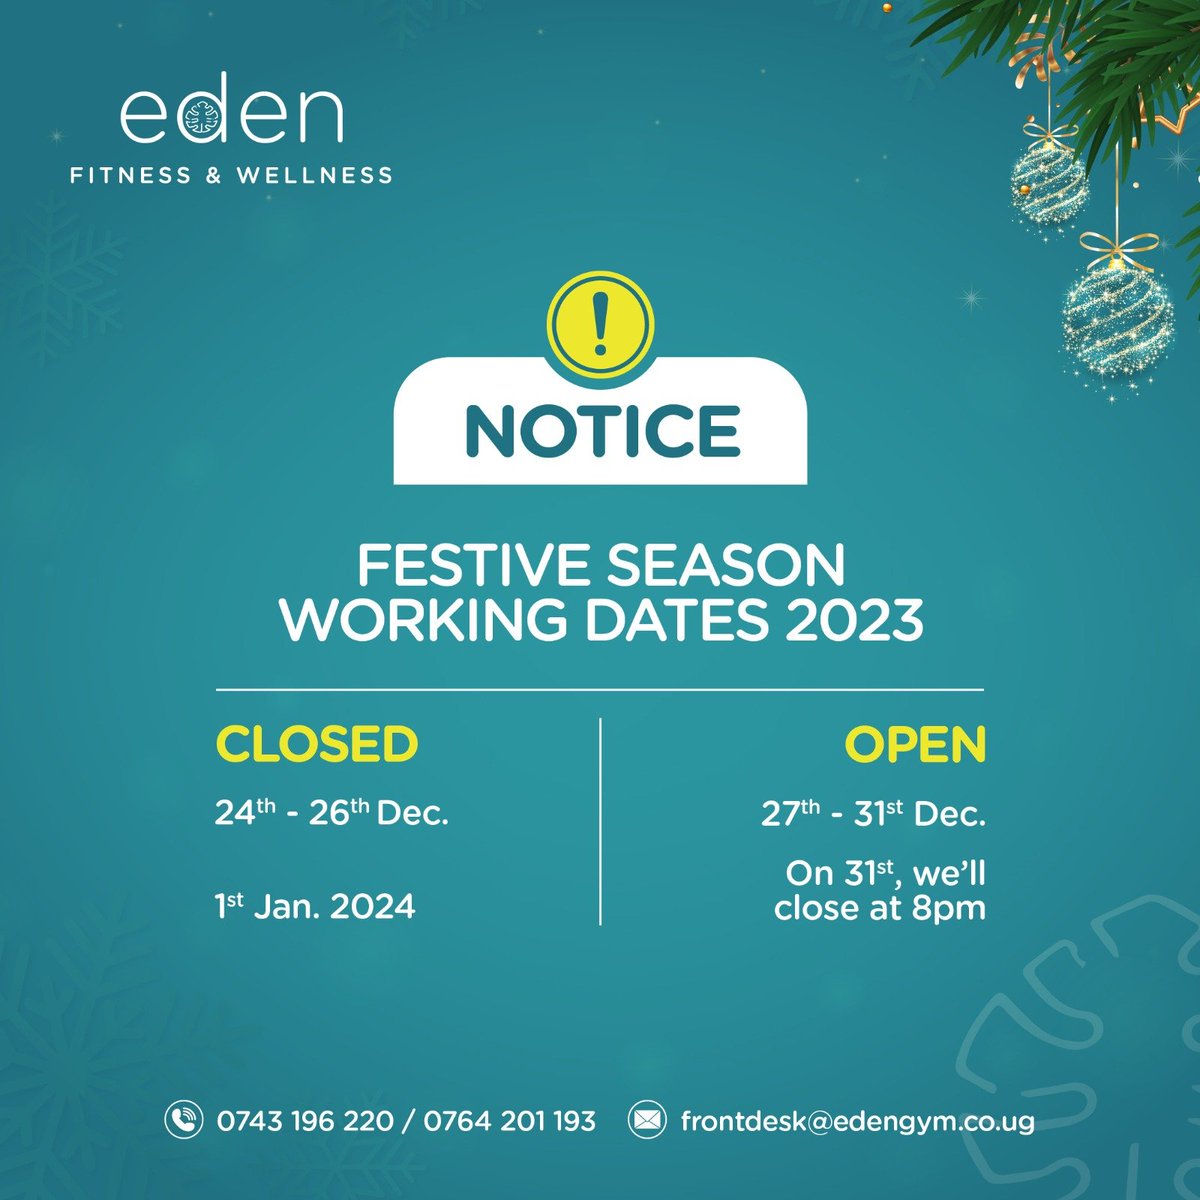 Dear valued clients, please note our festive schedule, open on select days. Wishing you a joyous holiday season filled with warmth.

Merry Christmas and happy holidays!!
#clientupdate #holidayhours #edengym #FestiveSeason #holidayfitness